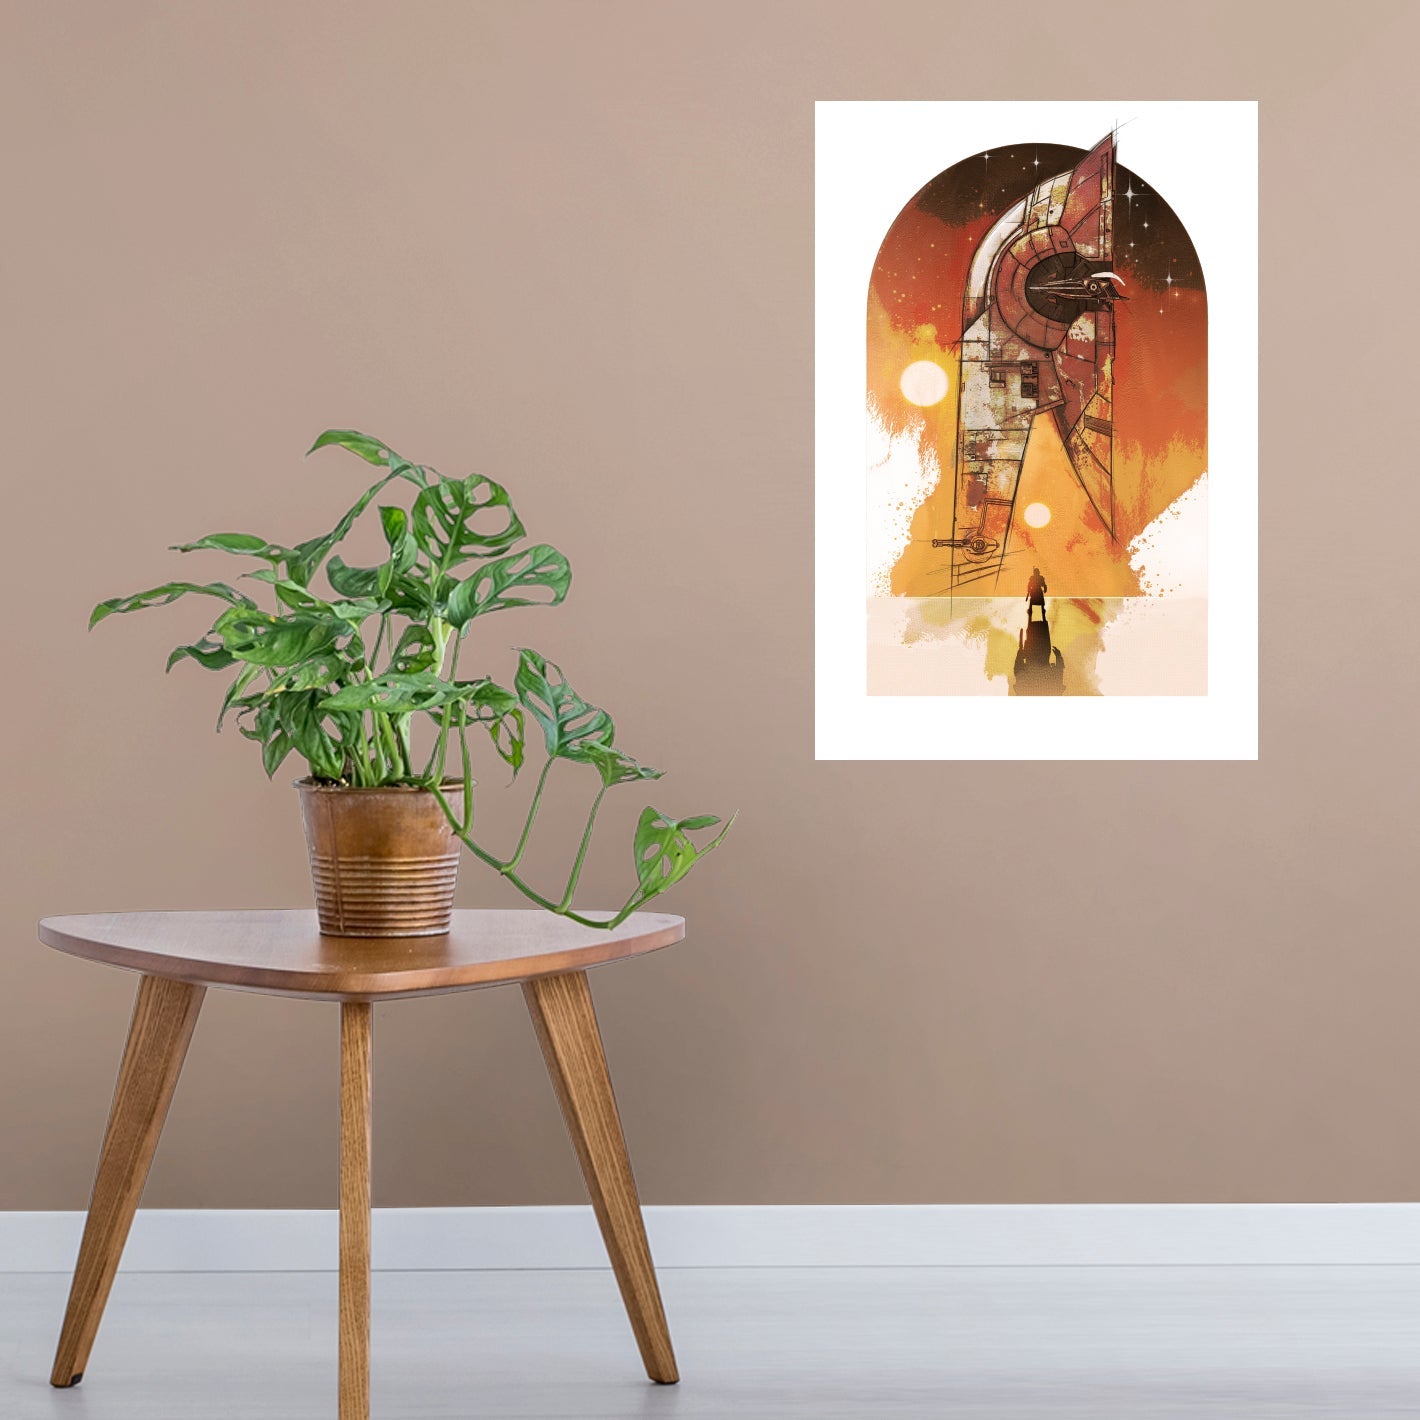 Book of Boba Fett: Boba Fett Firespray Painted Poster - Officially Licensed Star Wars Removable Adhesive Decal